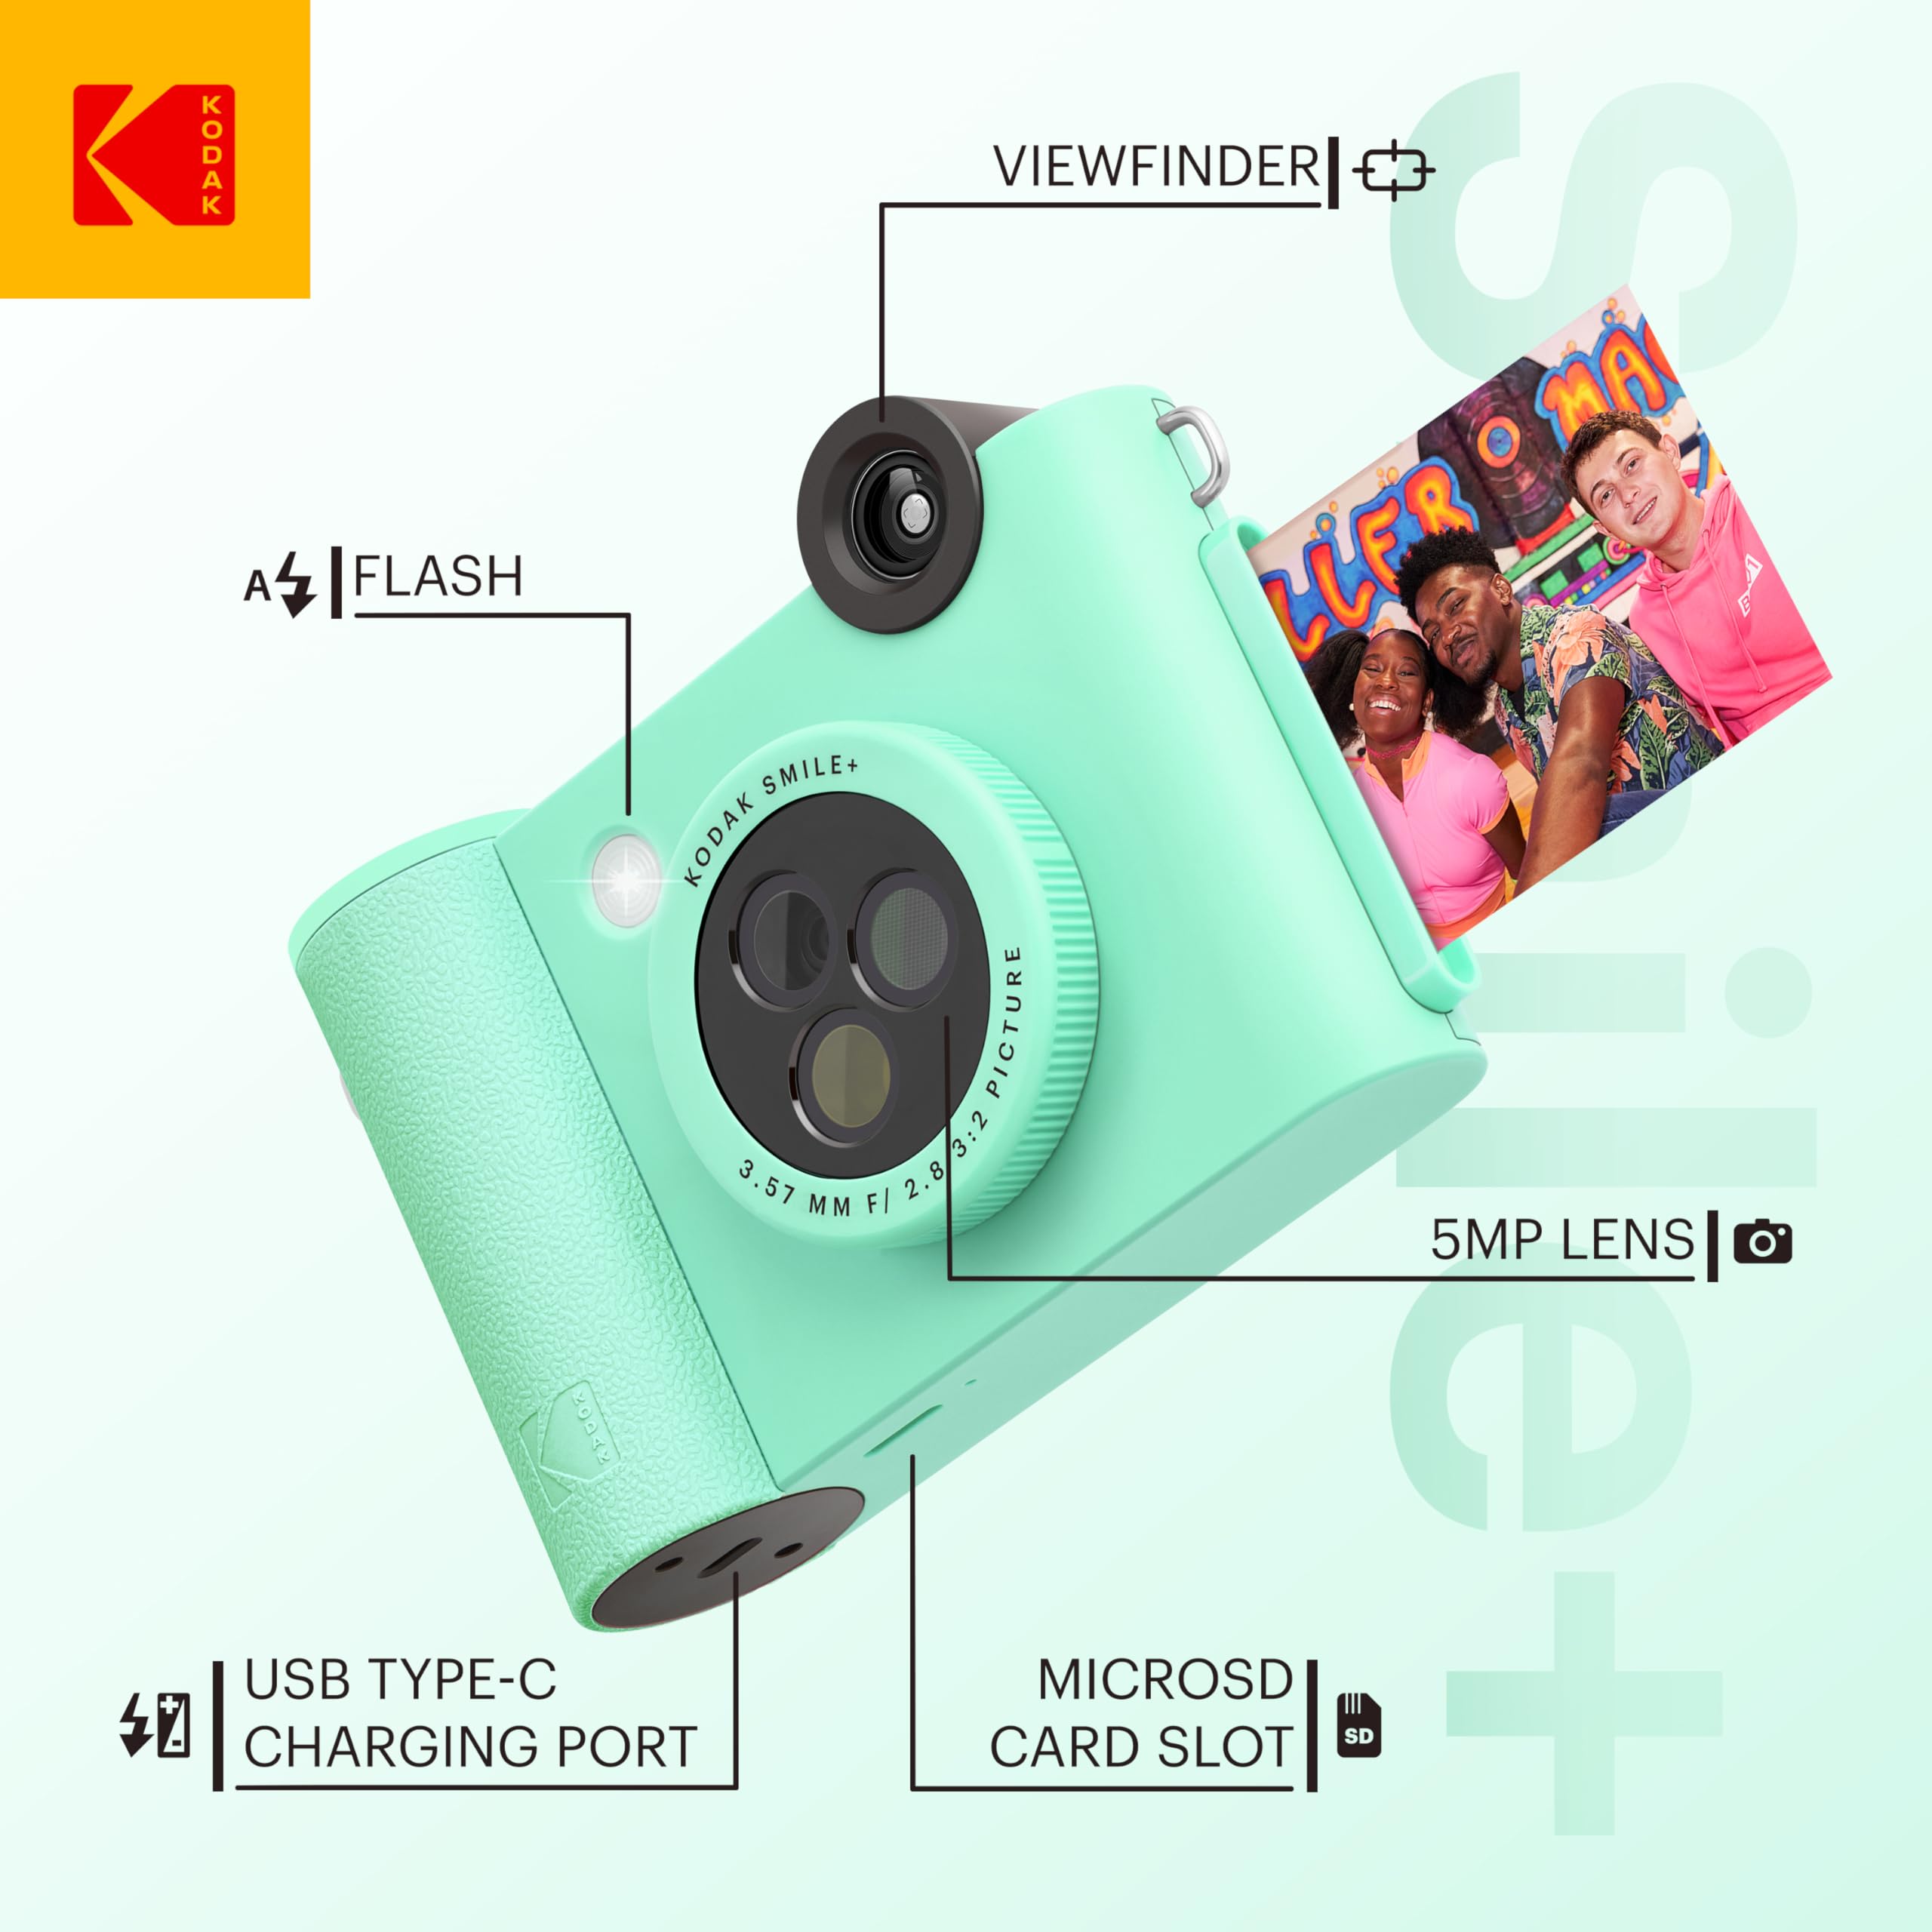 KODAK Smile+ Wireless Digital Instant Print Camera with Effect-Changing Lens, 2x3” Sticky-Backed Photo Prints, and Zink Printing Technology, Compatible with iOS and Android Devices - Green